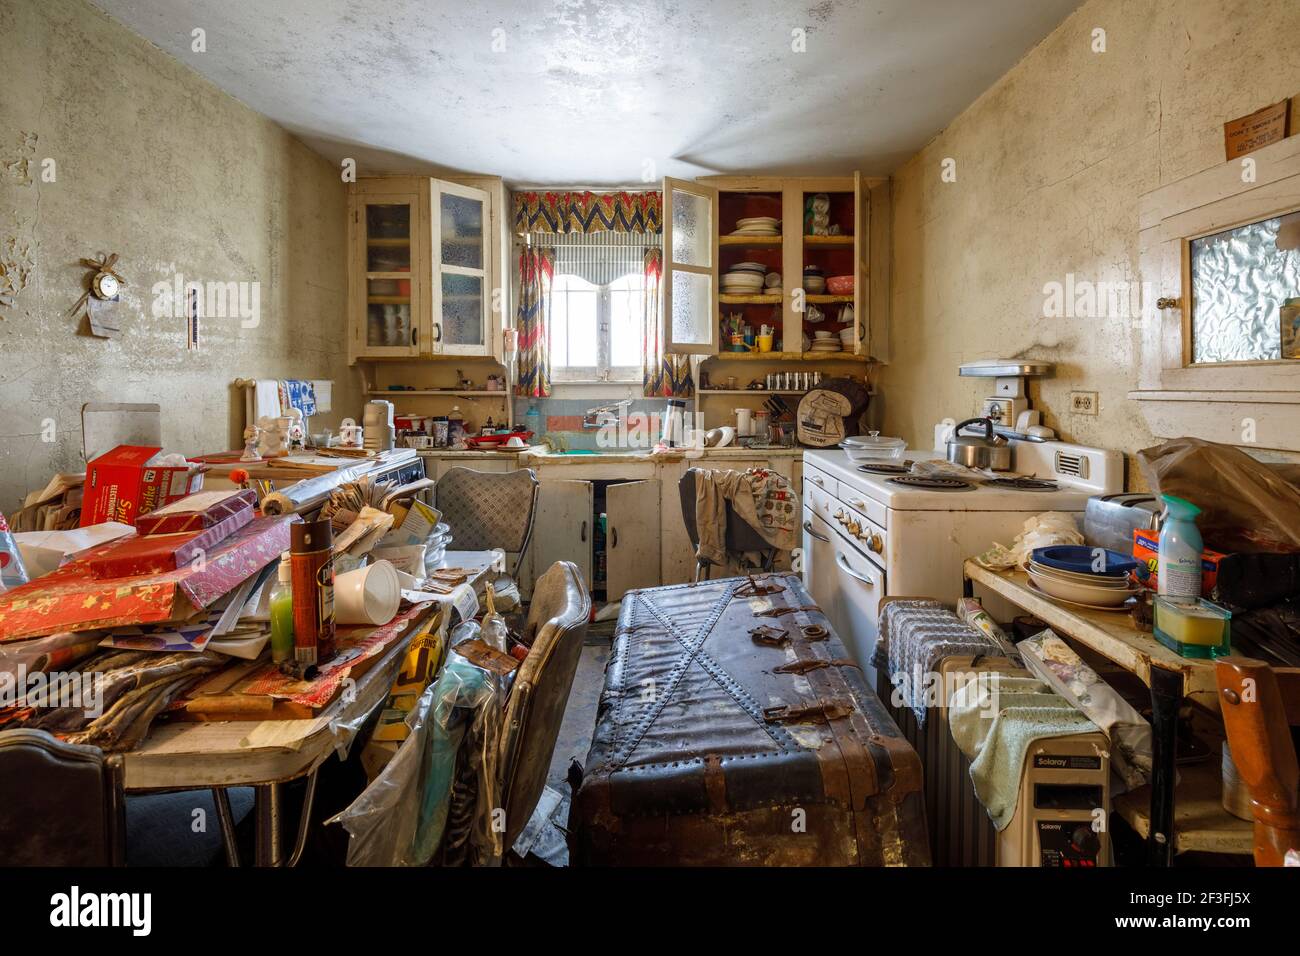 A very messy kitchen inside of an abandoned house. Stock Photo